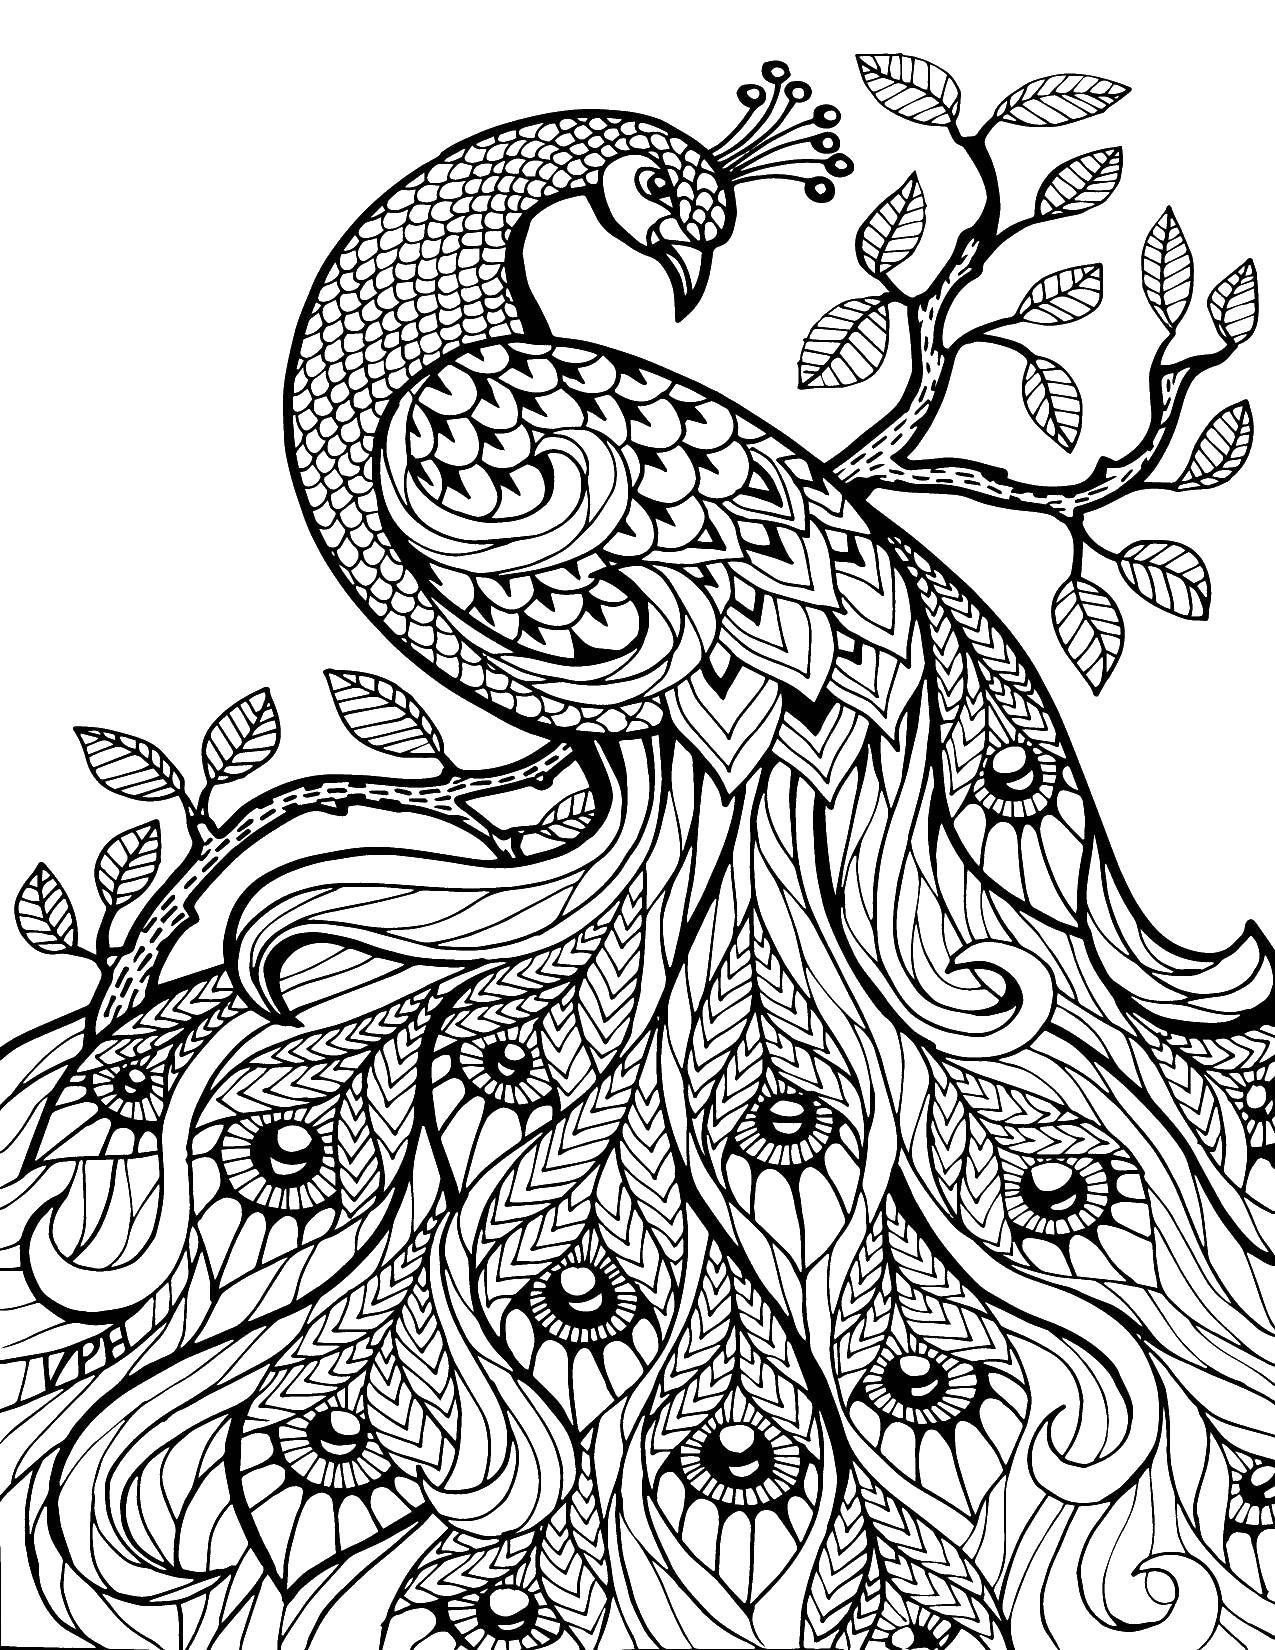 Coloring Peacock on the tree. Category peacock. Tags:  peacock, tail, patterns, anti-stress.